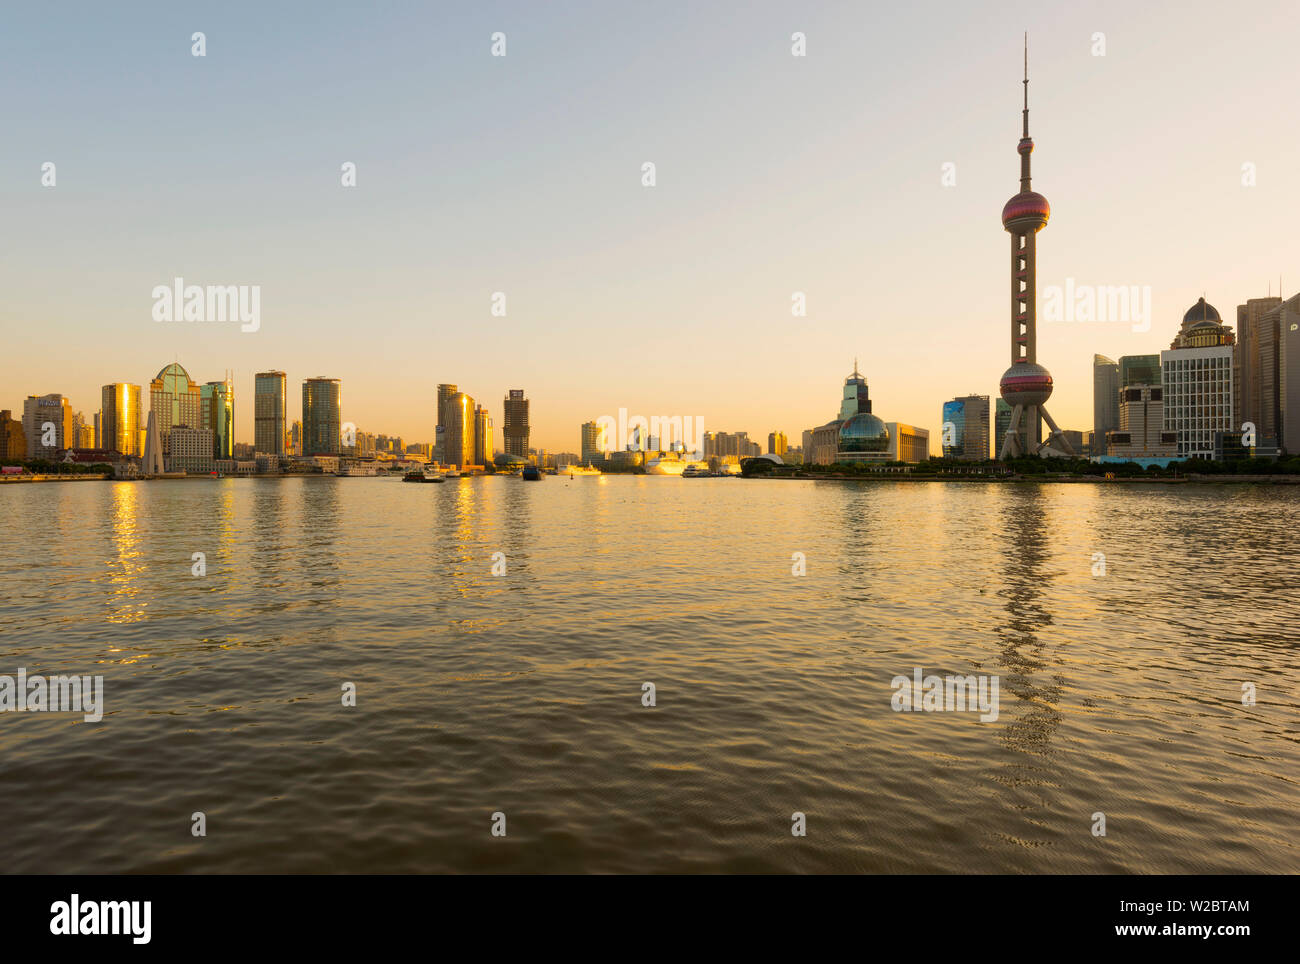 China, Shanghai, Pudong District, Skyline of the Financial District across Huangpu River at sunrise Stock Photo